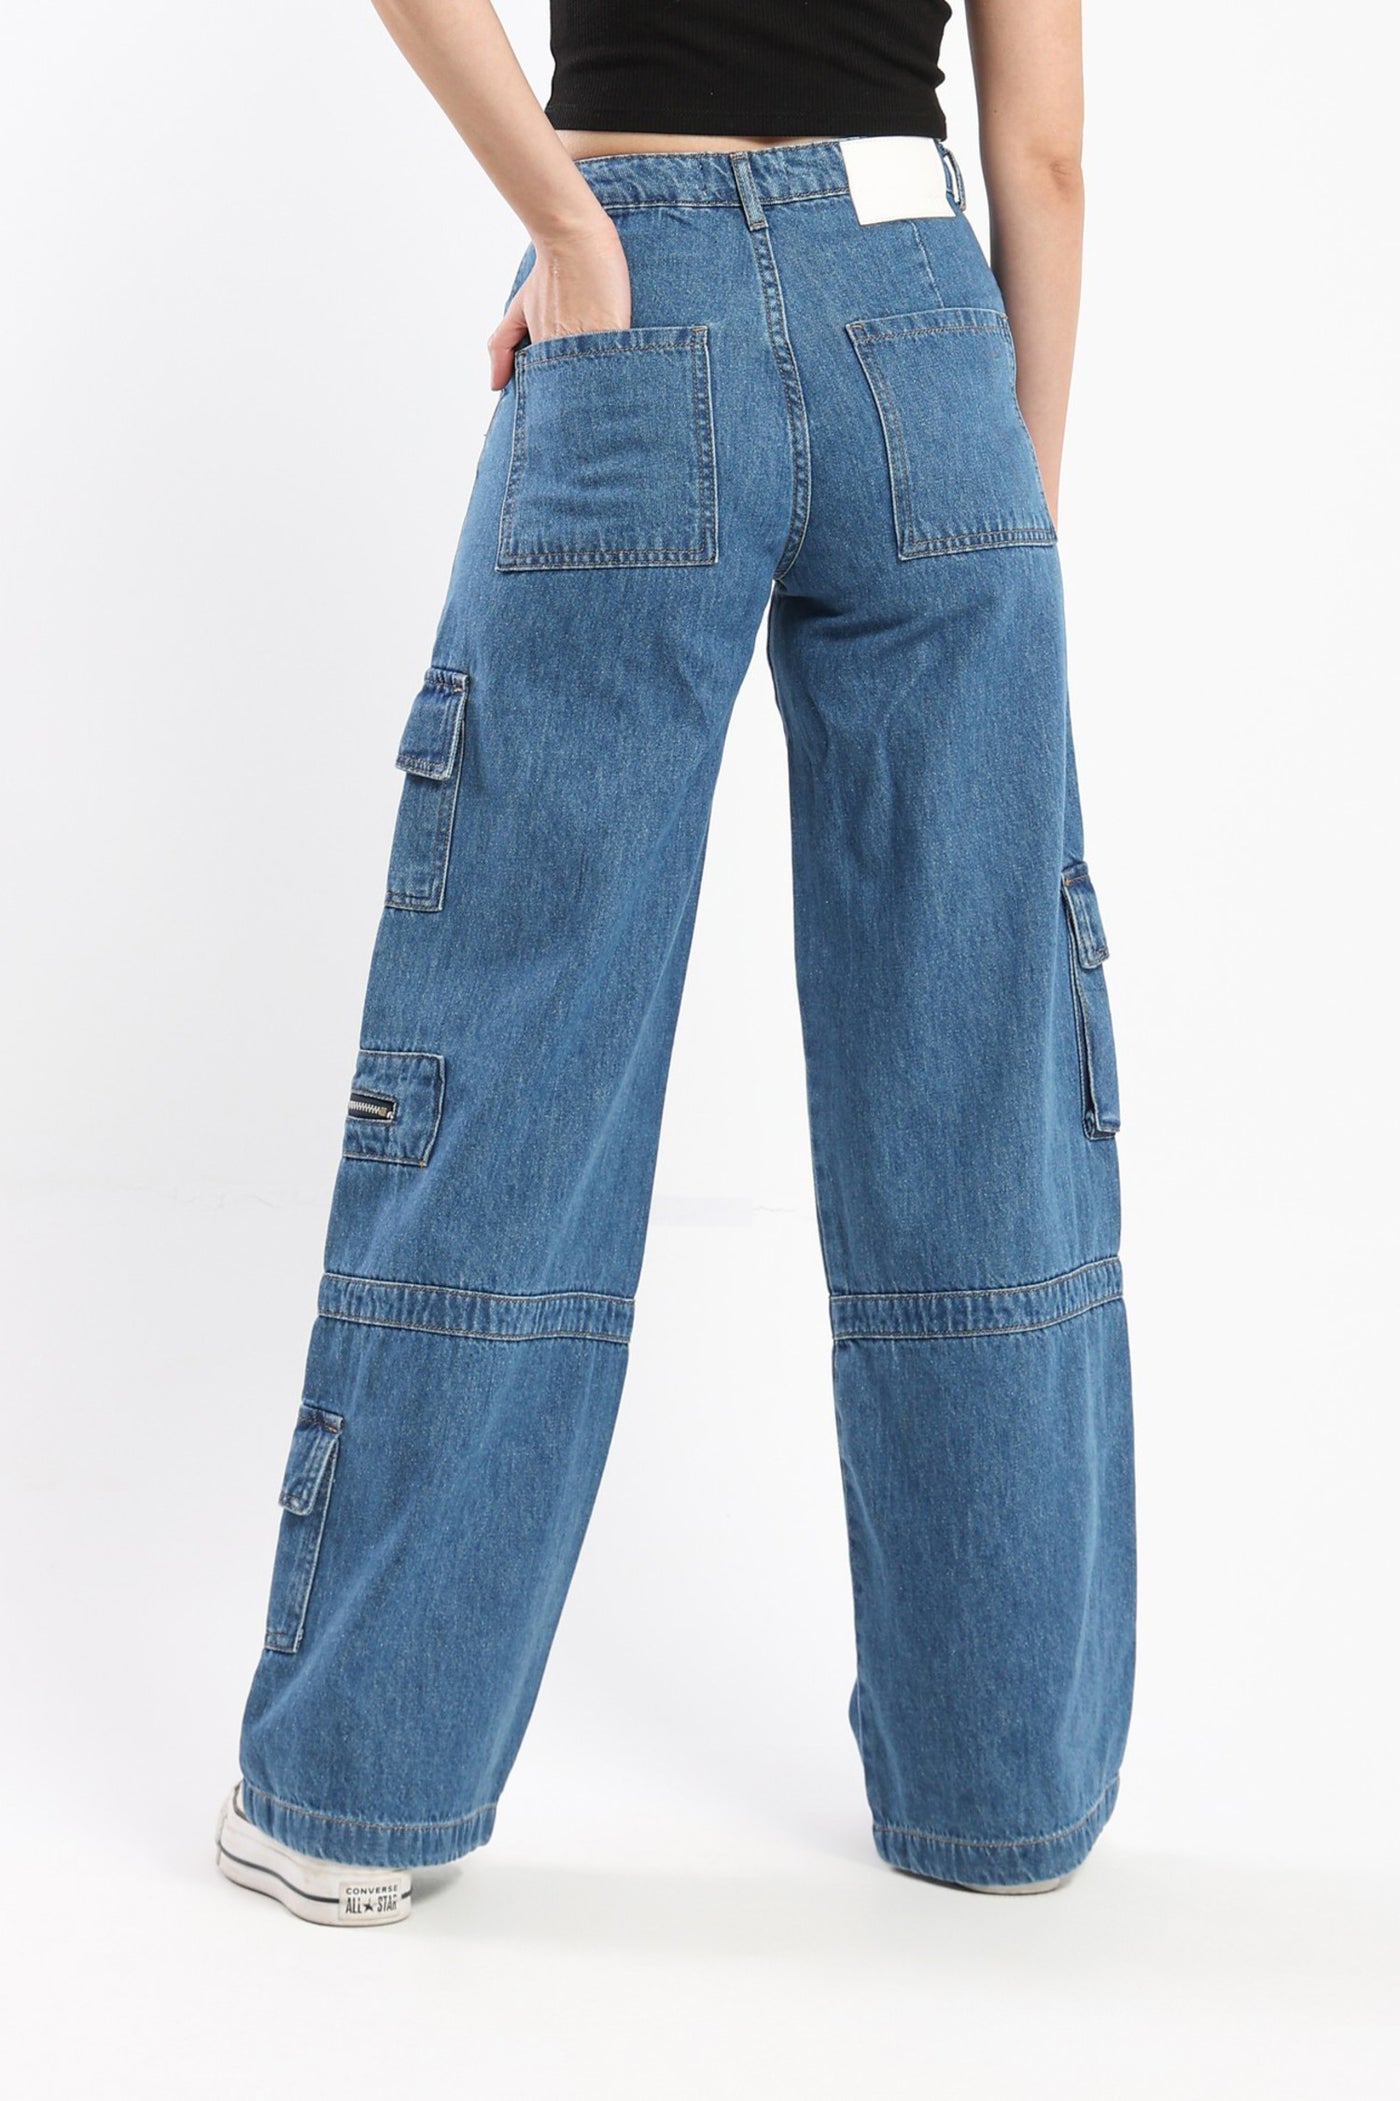 Jeans - Wide Leg - With Pockets